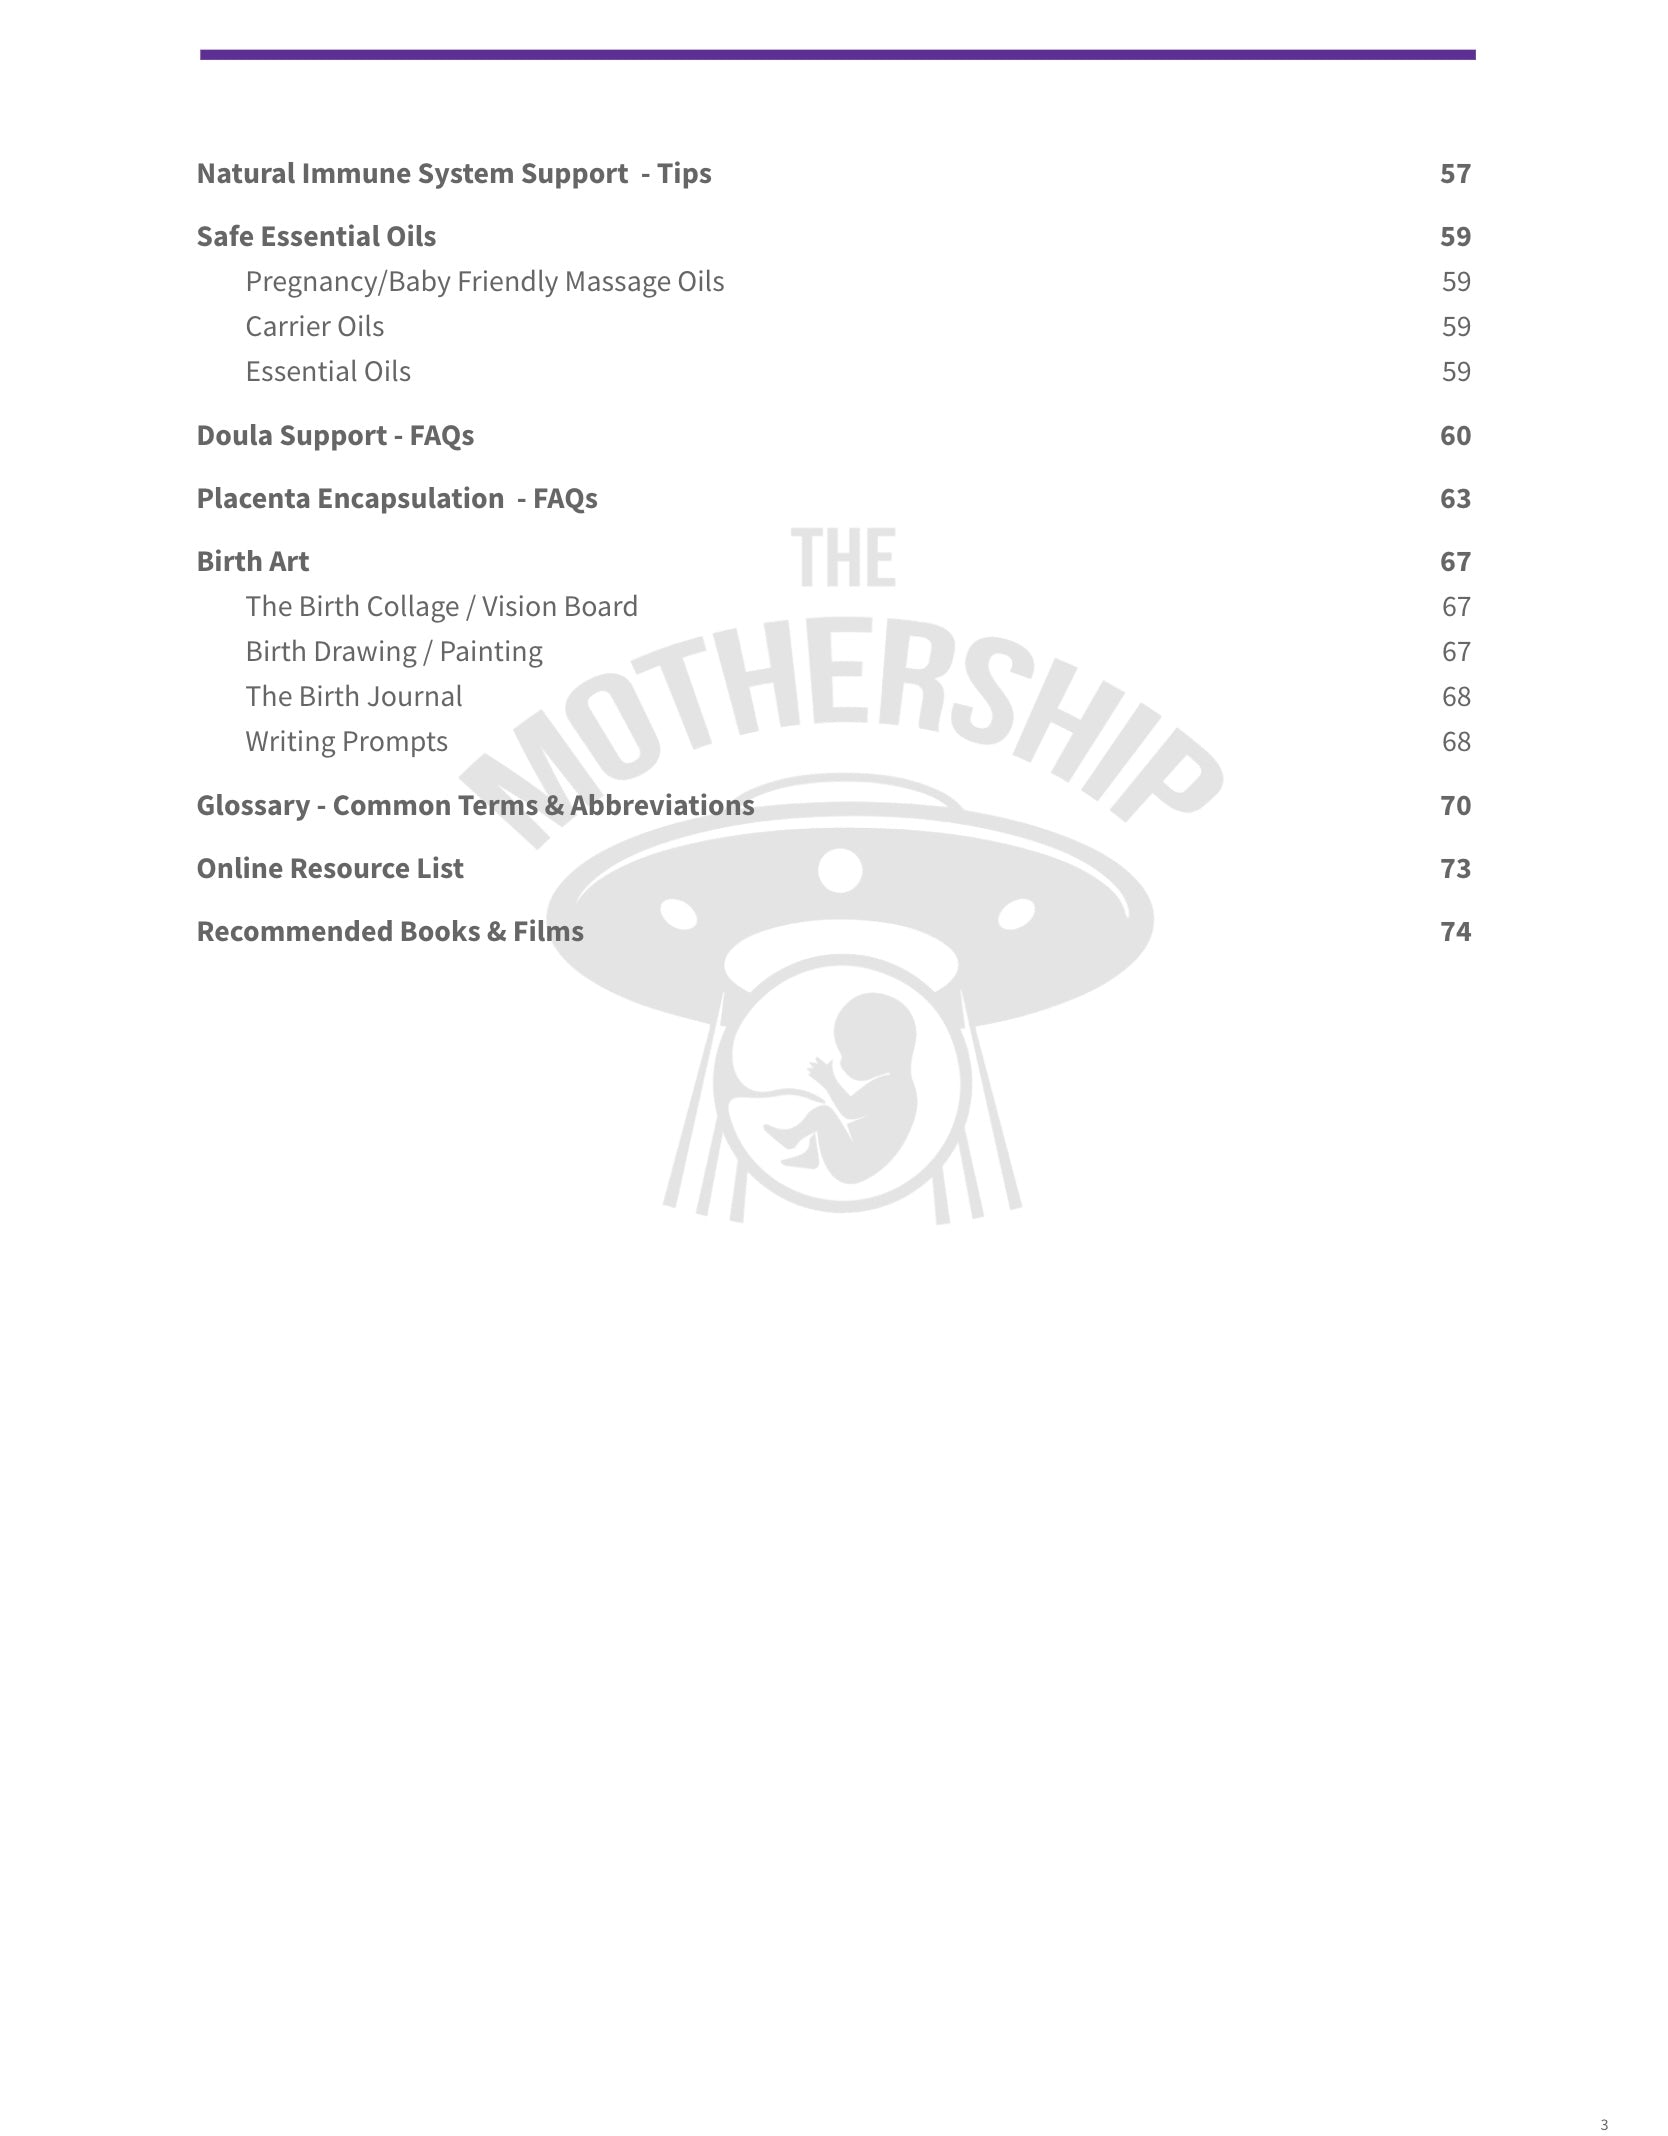 The Mothership Birth Guide & Planner (eBook or Print Copy)